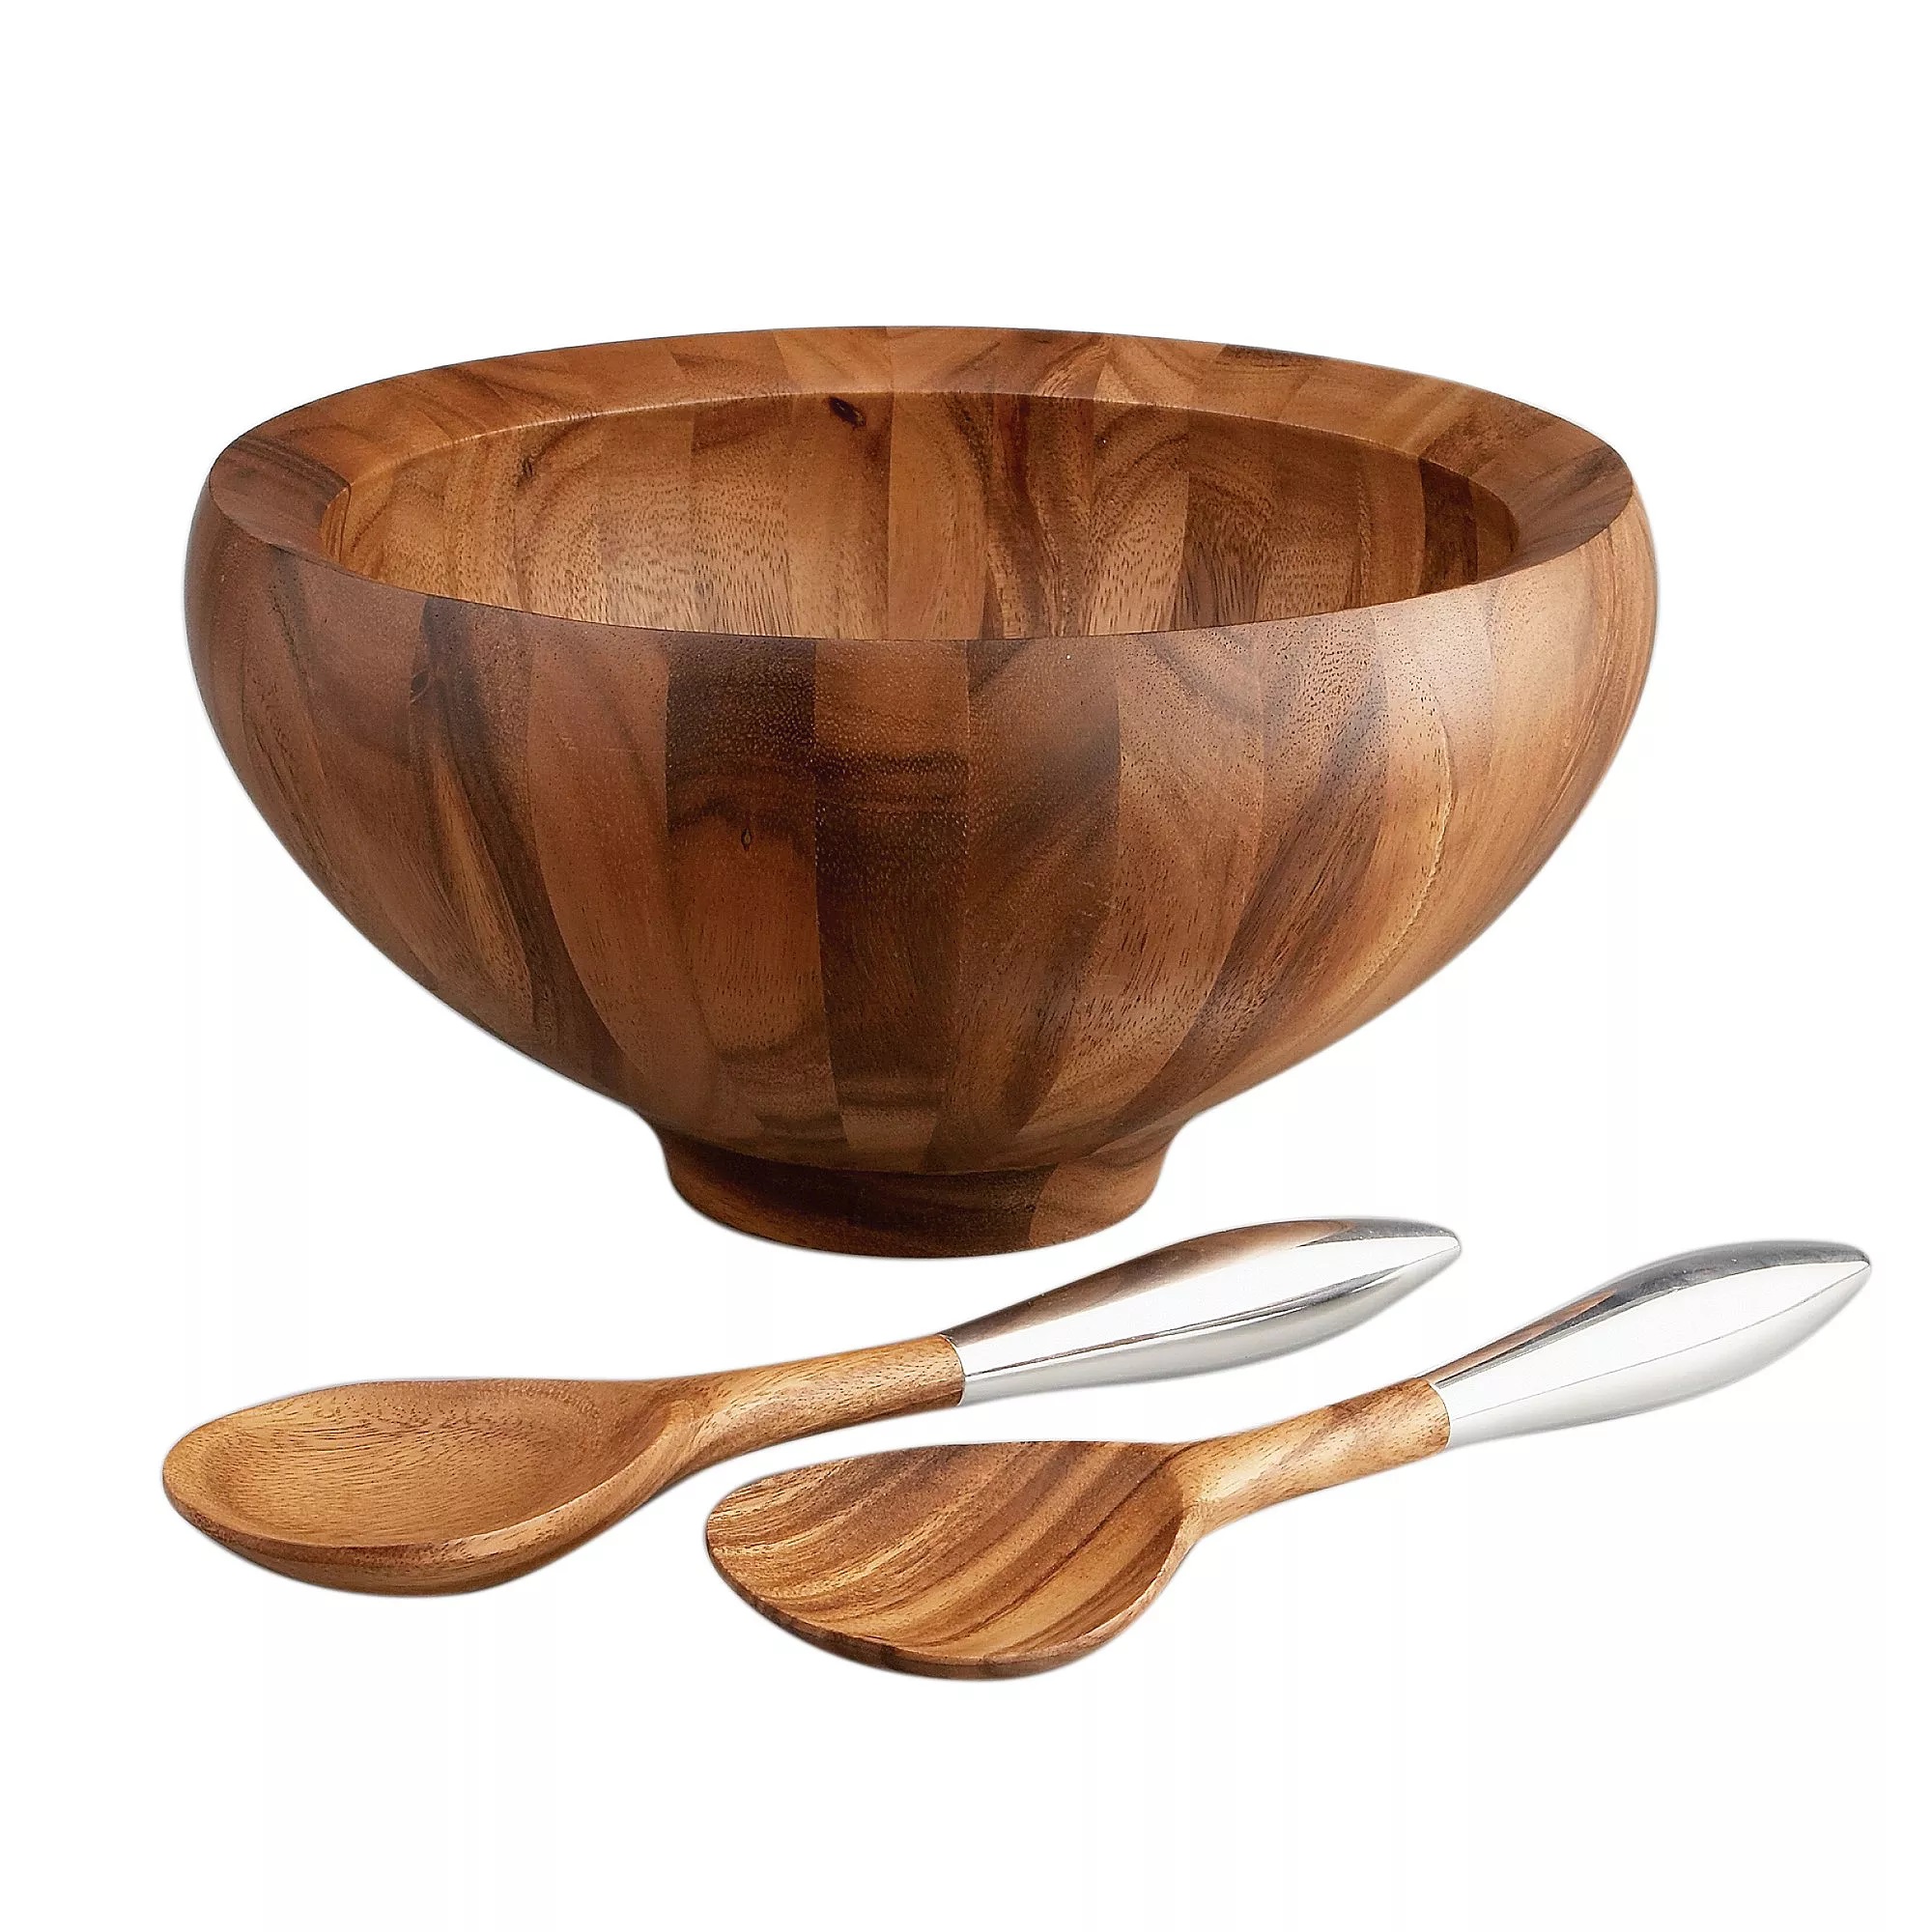 Add this wooden bowl and spoons to your registry.